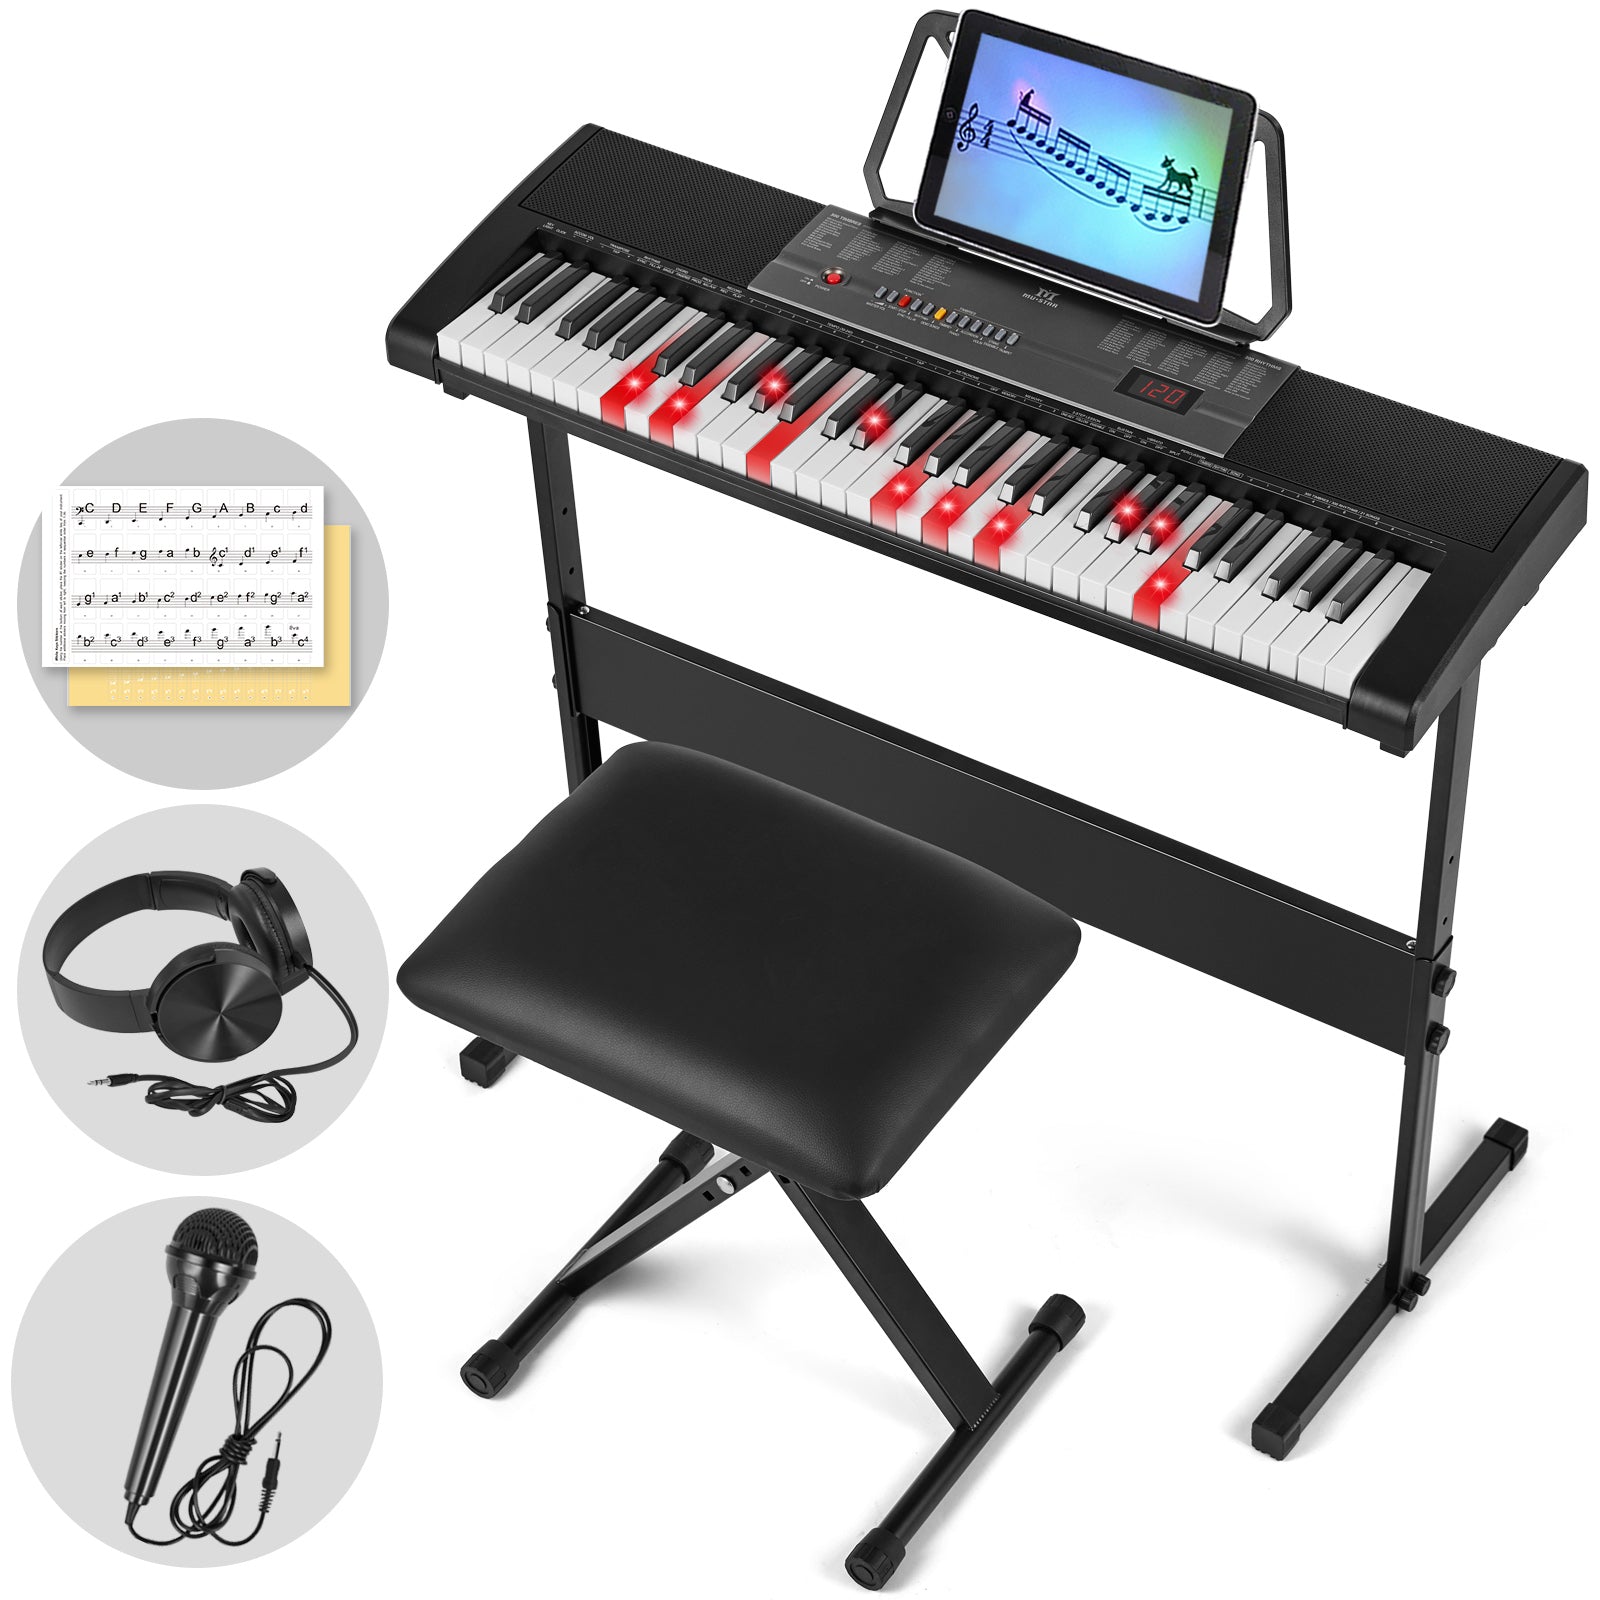 MUSTAR MEKS-700, Piano Keyboard with Lighted Up Keys, 61 Keys Learning Keyboard for Beginners with Bench